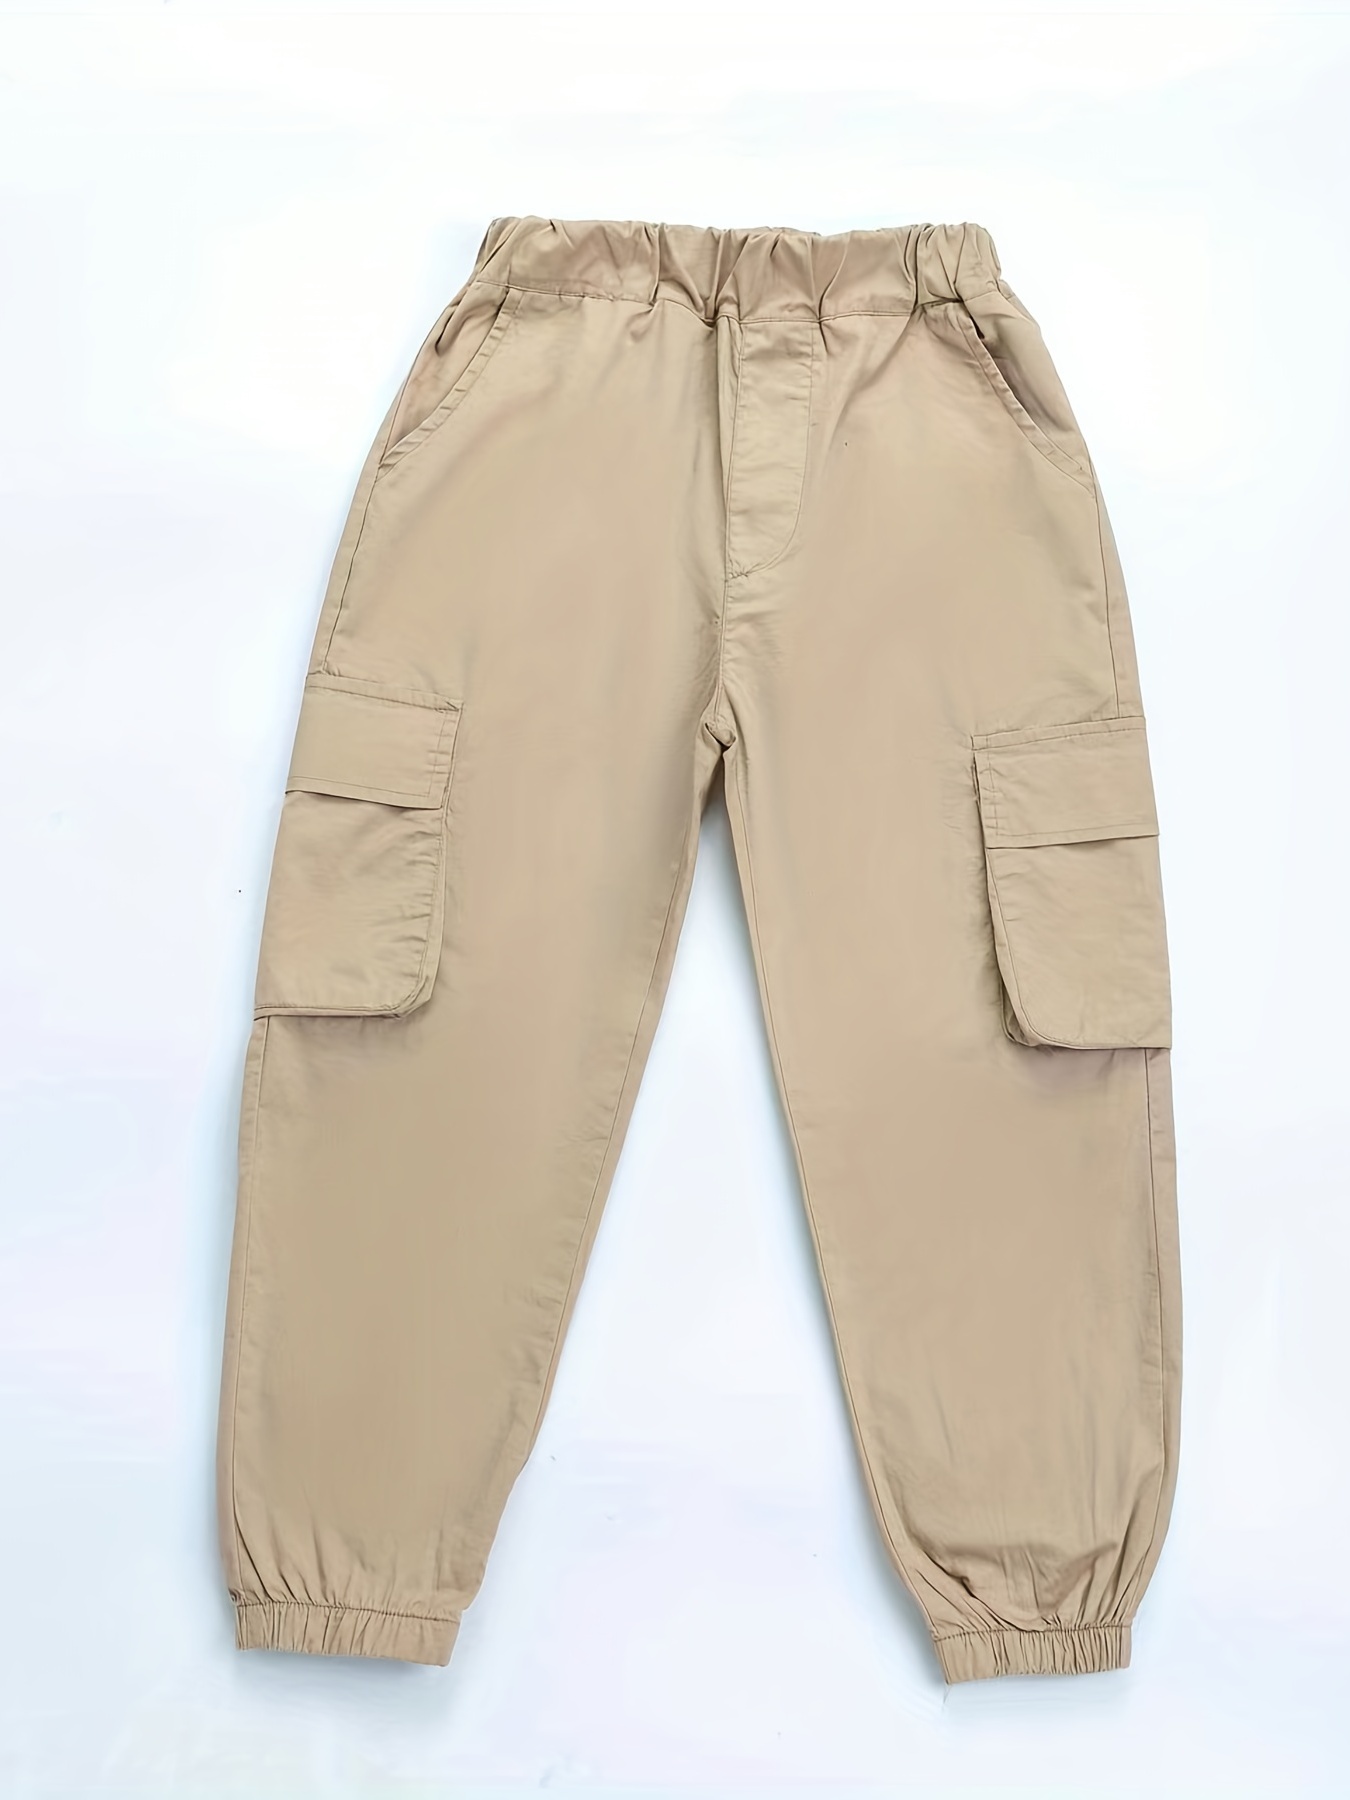 Girls Cargo Pants With Flap Pockets Elastic Waist Casual Joggers Loose Fit  Trousers